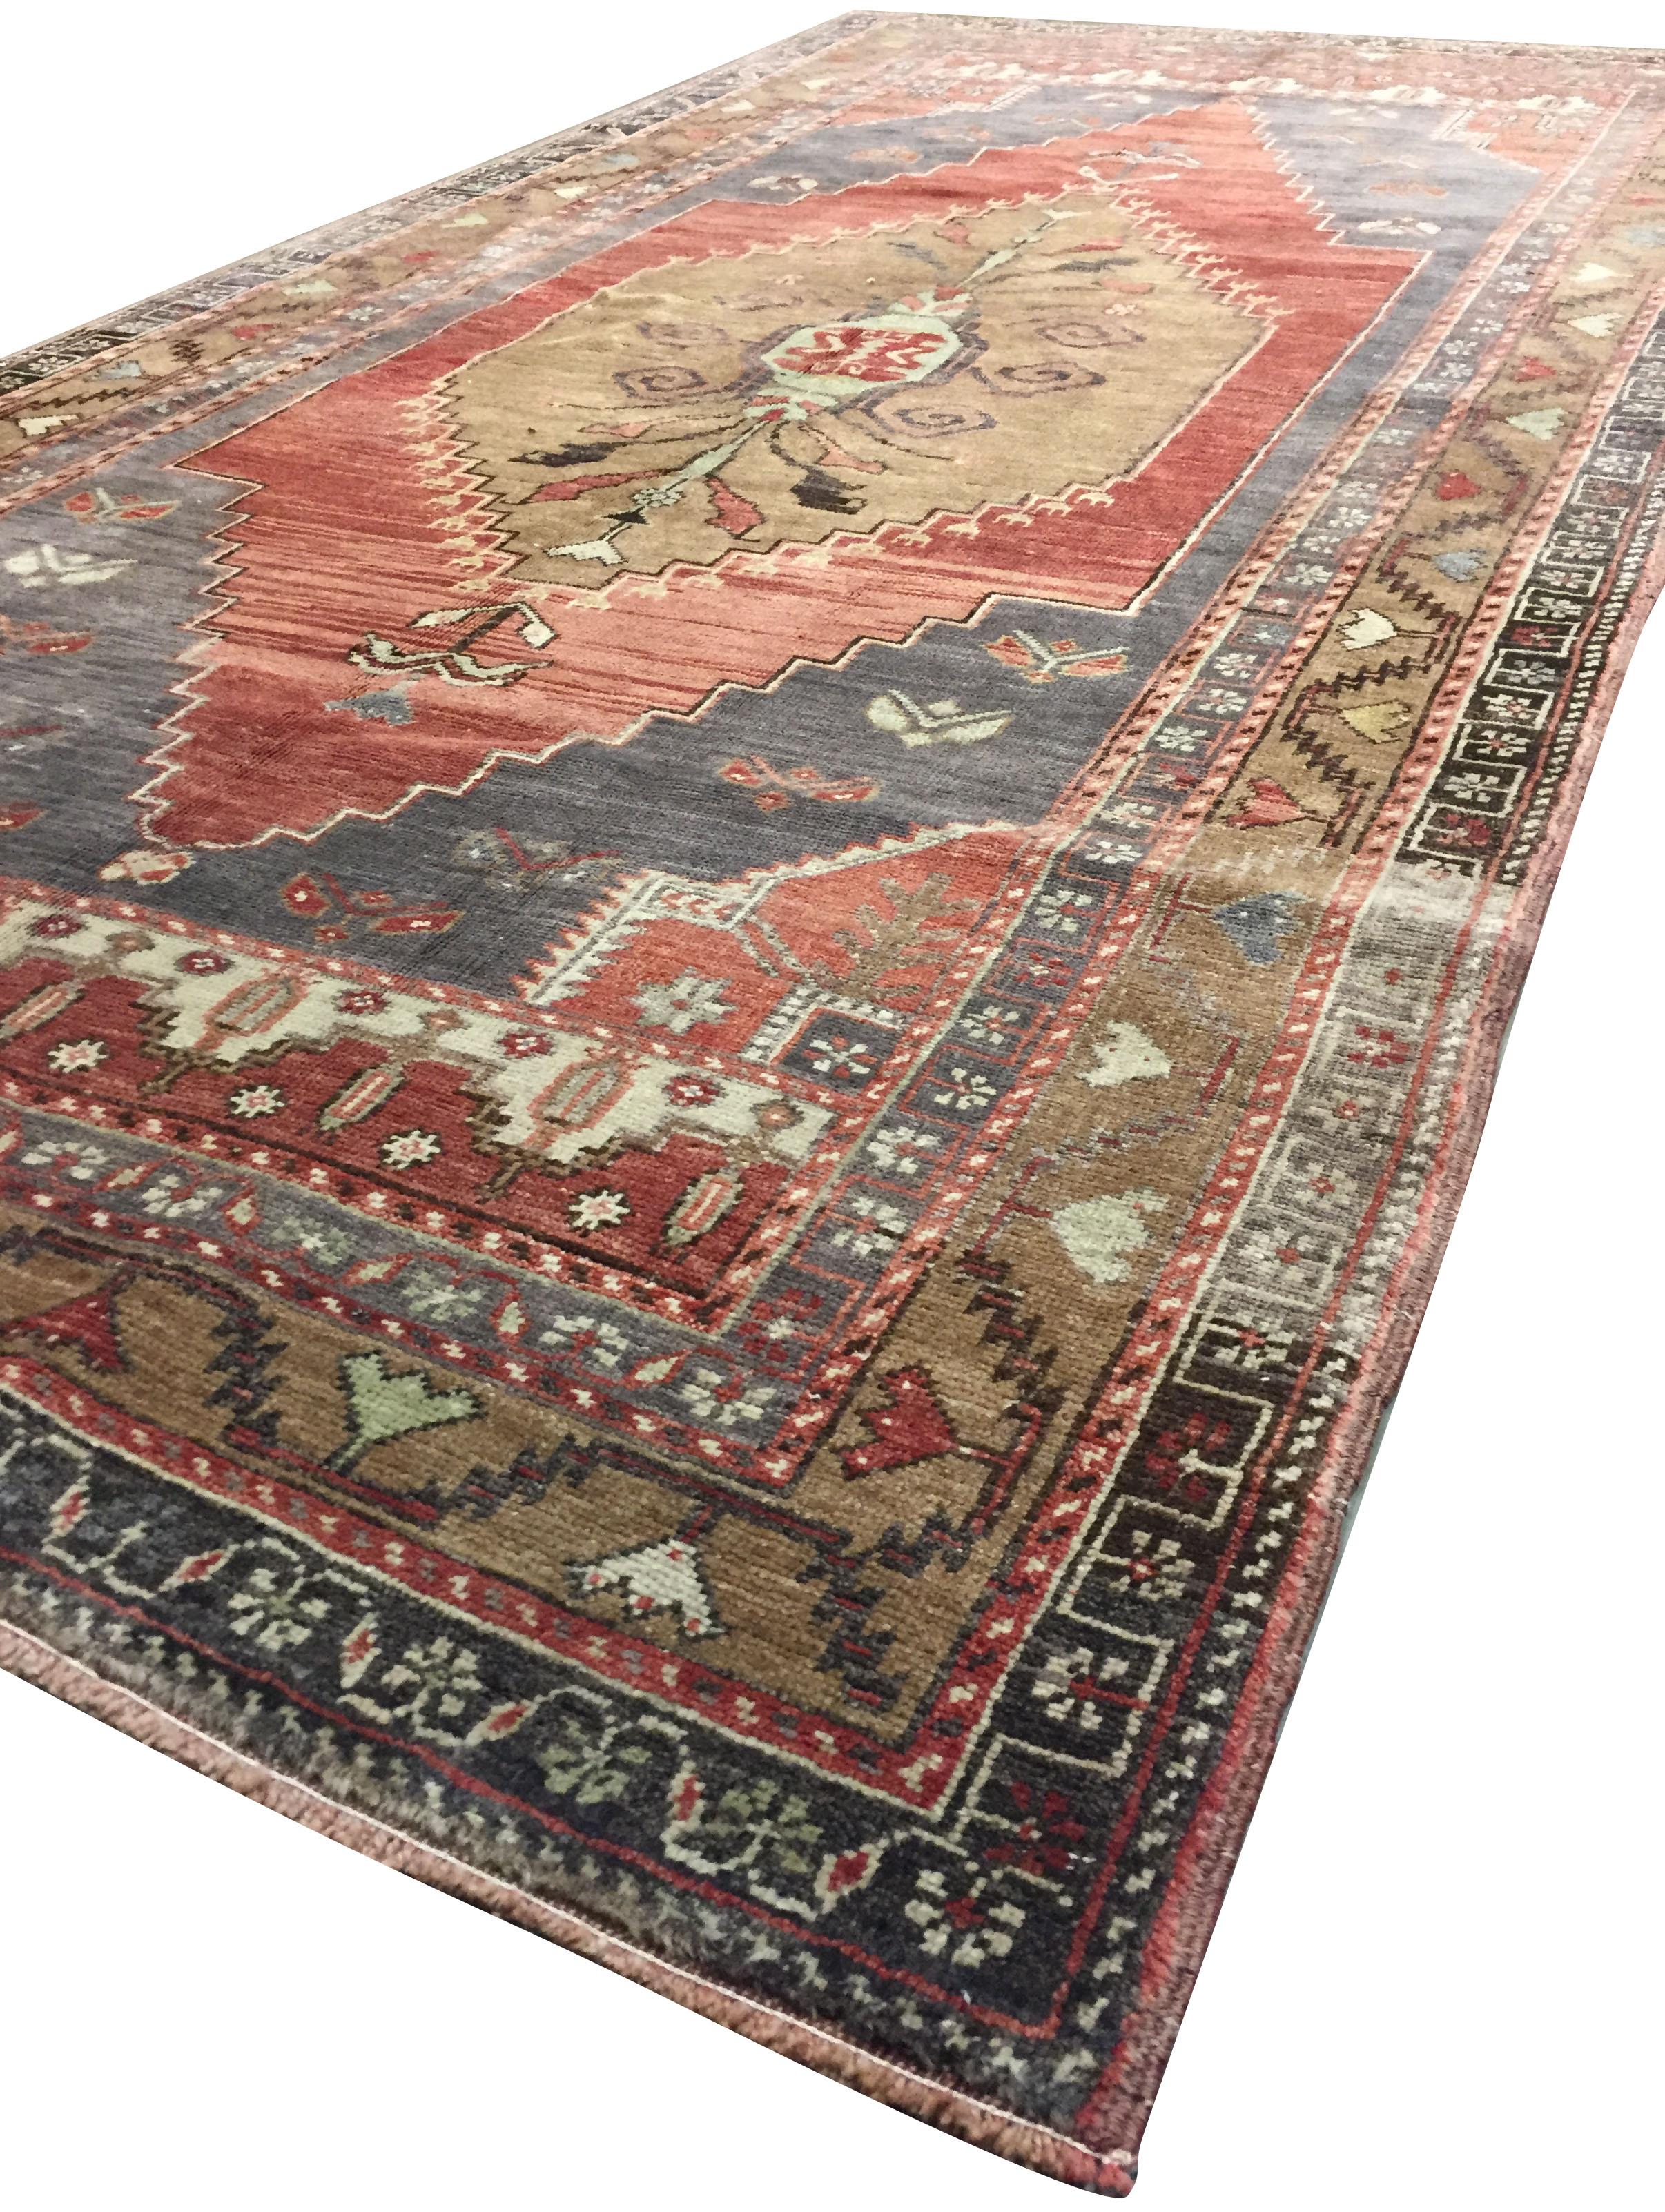 Vintage Turkish Oushak Rug  4'7 x 8'7 In Good Condition For Sale In New York, NY